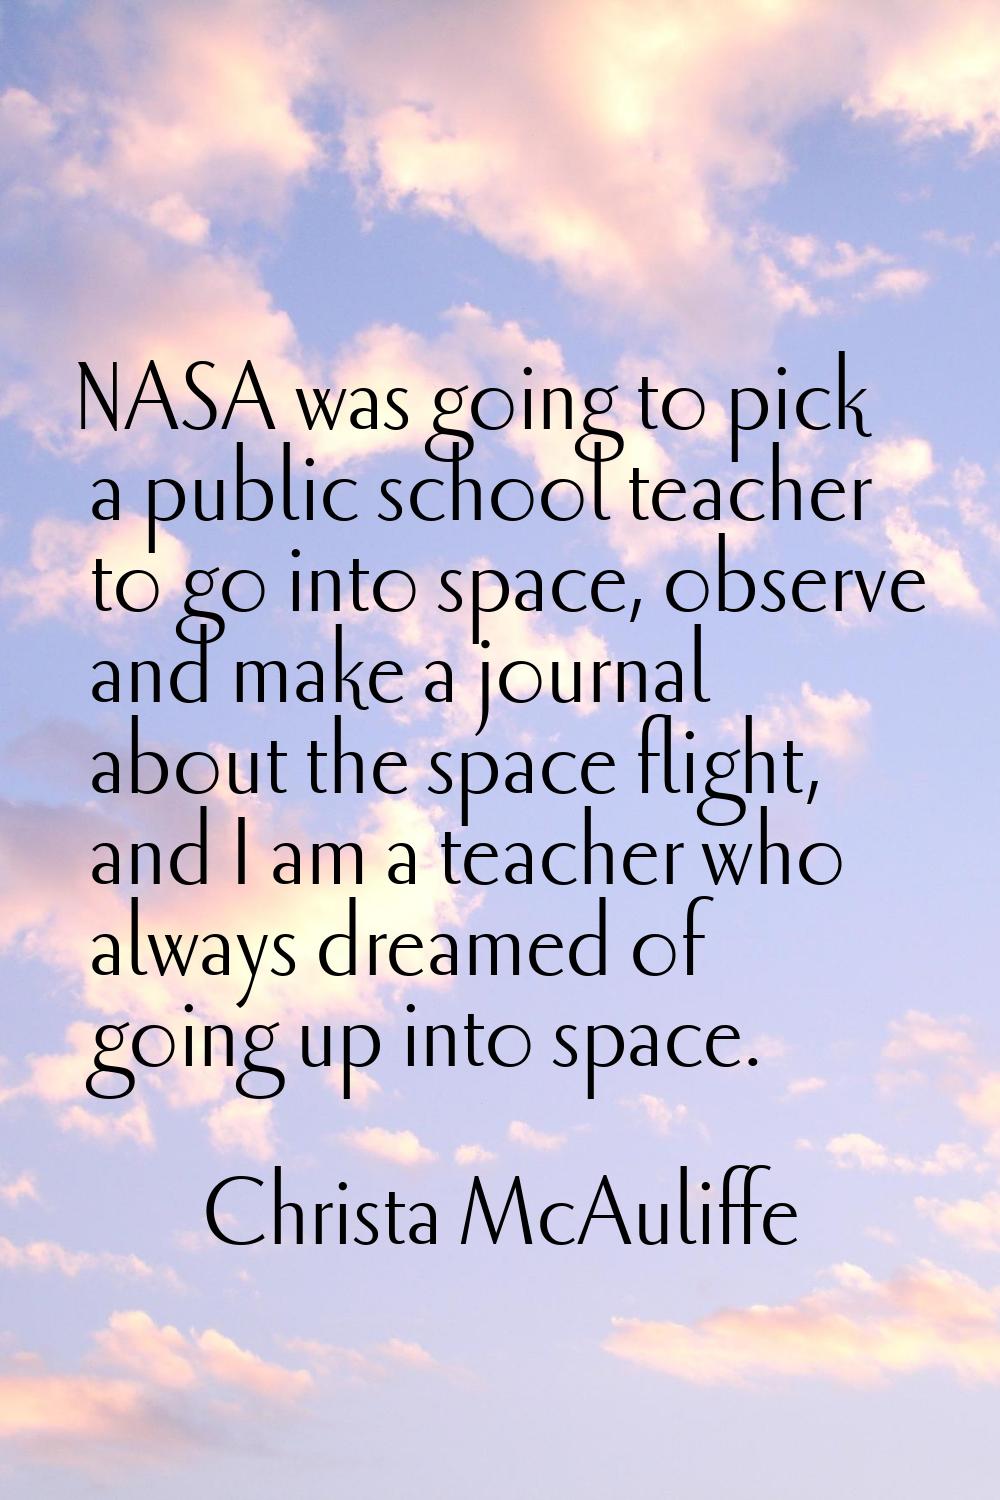 NASA was going to pick a public school teacher to go into space, observe and make a journal about t